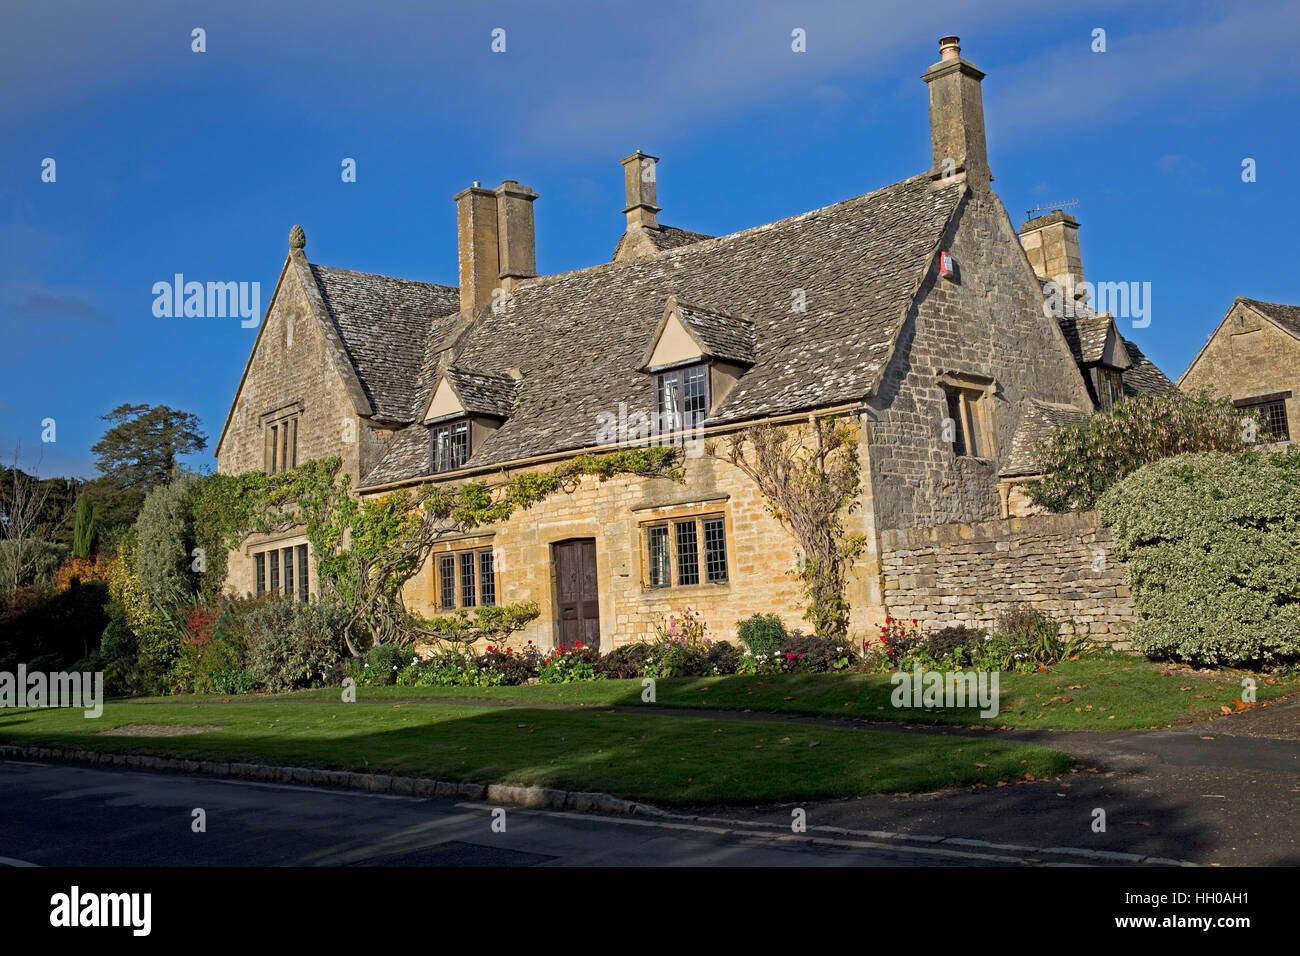 Attractive Cotswold stone cottage with stone tiles mullion windows sunlit against blue sky Chipping Campden UK Stock Photo